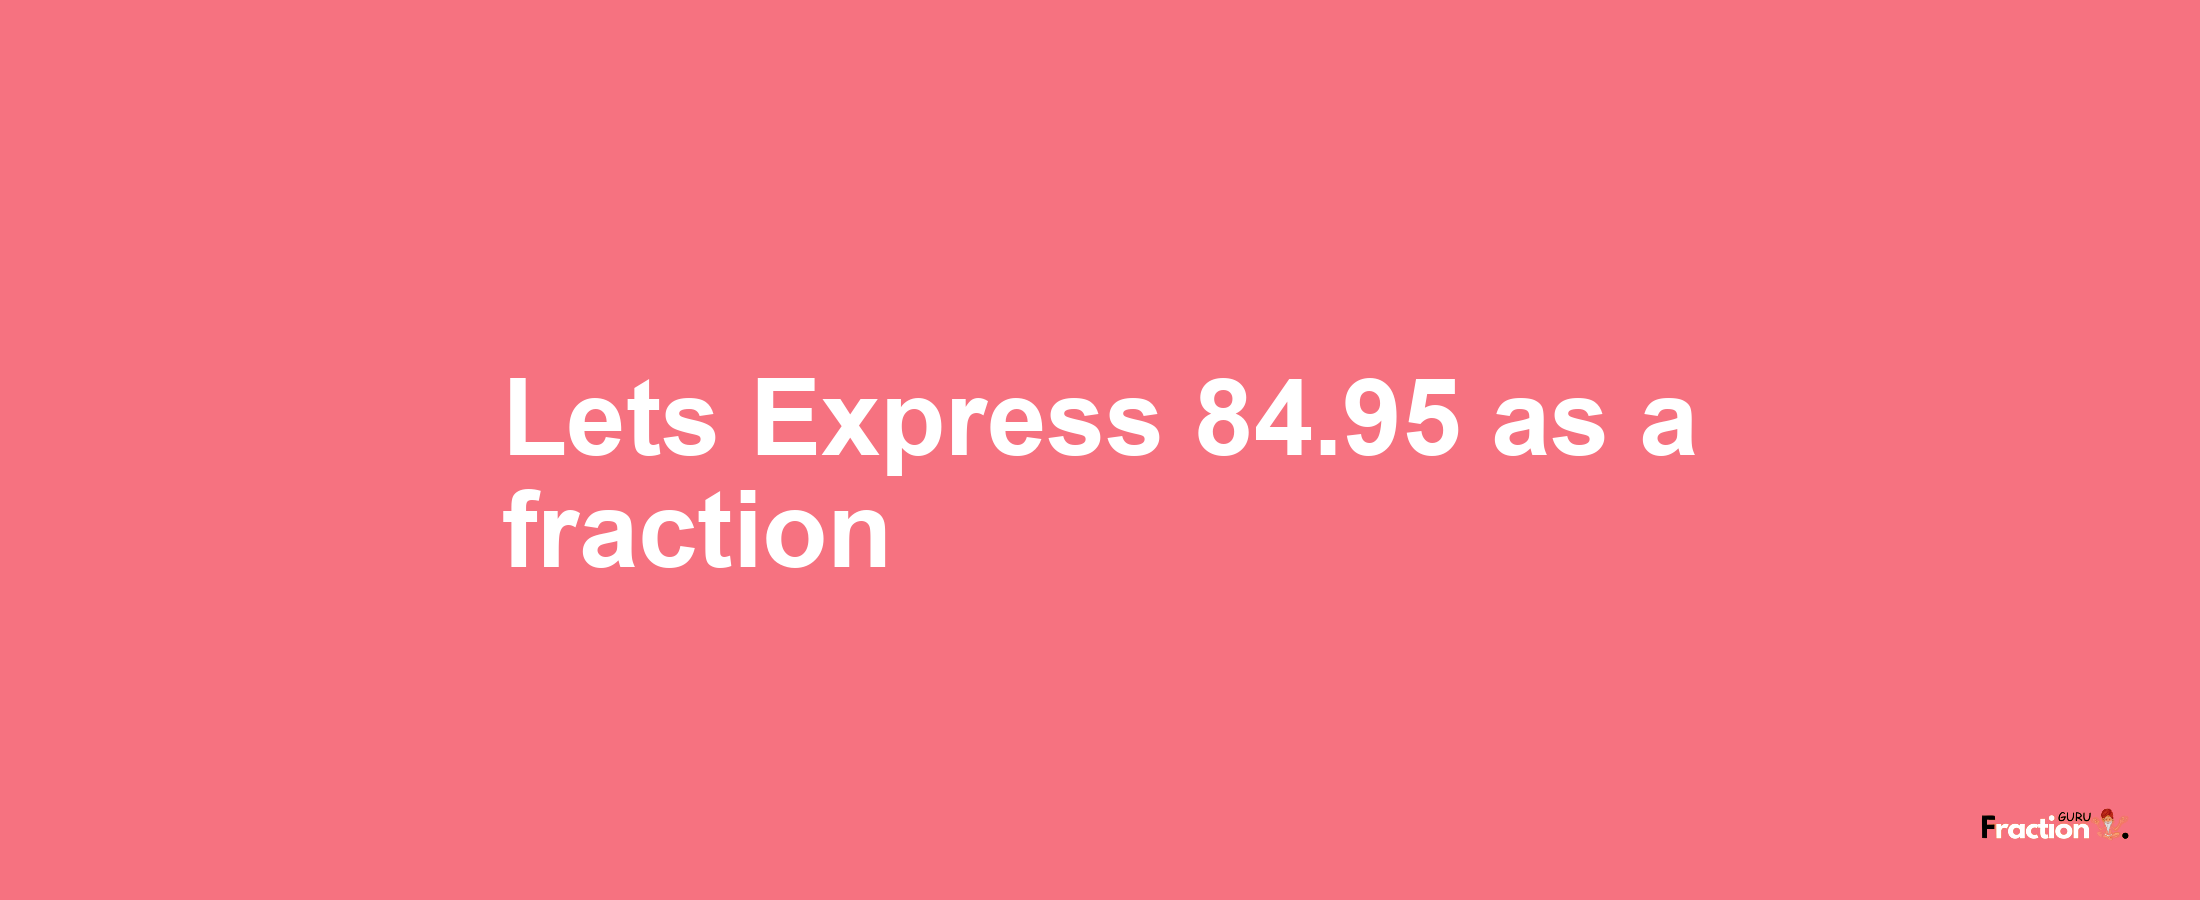 Lets Express 84.95 as afraction